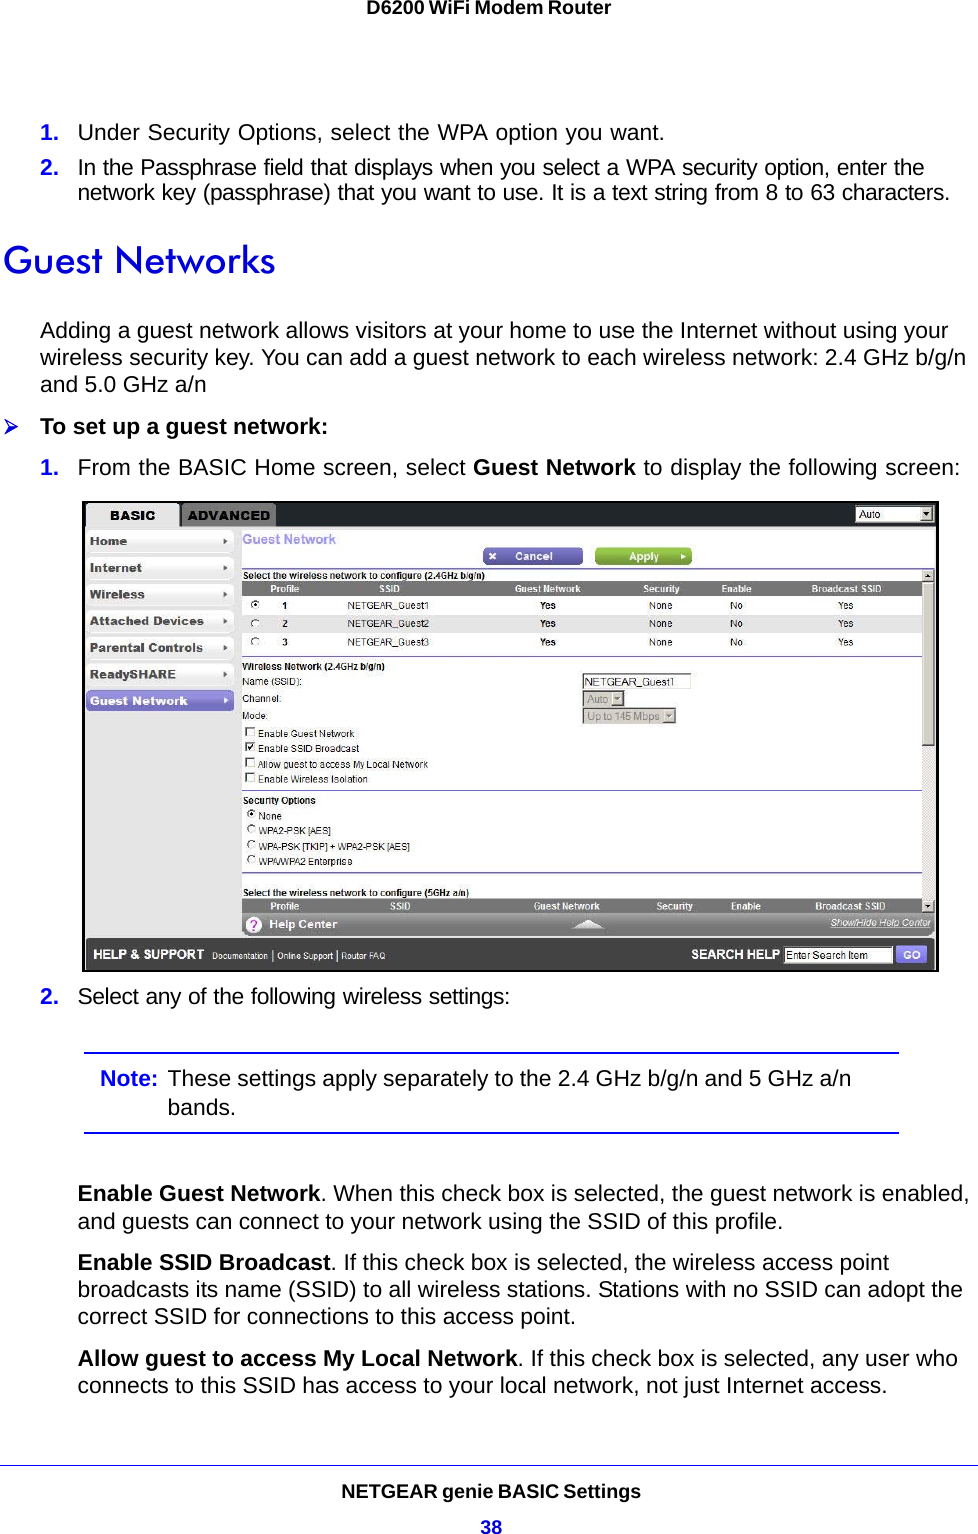 NETGEAR genie BASIC Settings38D6200 WiFi Modem Router 1. Under Security Options, select the WPA option you want.2. In the Passphrase field that displays when you select a WPA security option, enter the network key (passphrase) that you want to use. It is a text string from 8 to 63 characters.Guest NetworksAdding a guest network allows visitors at your home to use the Internet without using your wireless security key. You can add a guest network to each wireless network: 2.4 GHz b/g/n and 5.0 GHz a/n To set up a guest network:1. From the BASIC Home screen, select Guest Network to display the following screen: 2. Select any of the following wireless settings:Note: These settings apply separately to the 2.4 GHz b/g/n and 5 GHz a/n bands.Enable Guest Network. When this check box is selected, the guest network is enabled, and guests can connect to your network using the SSID of this profile.Enable SSID Broadcast. If this check box is selected, the wireless access point broadcasts its name (SSID) to all wireless stations. Stations with no SSID can adopt the correct SSID for connections to this access point.Allow guest to access My Local Network. If this check box is selected, any user who connects to this SSID has access to your local network, not just Internet access.